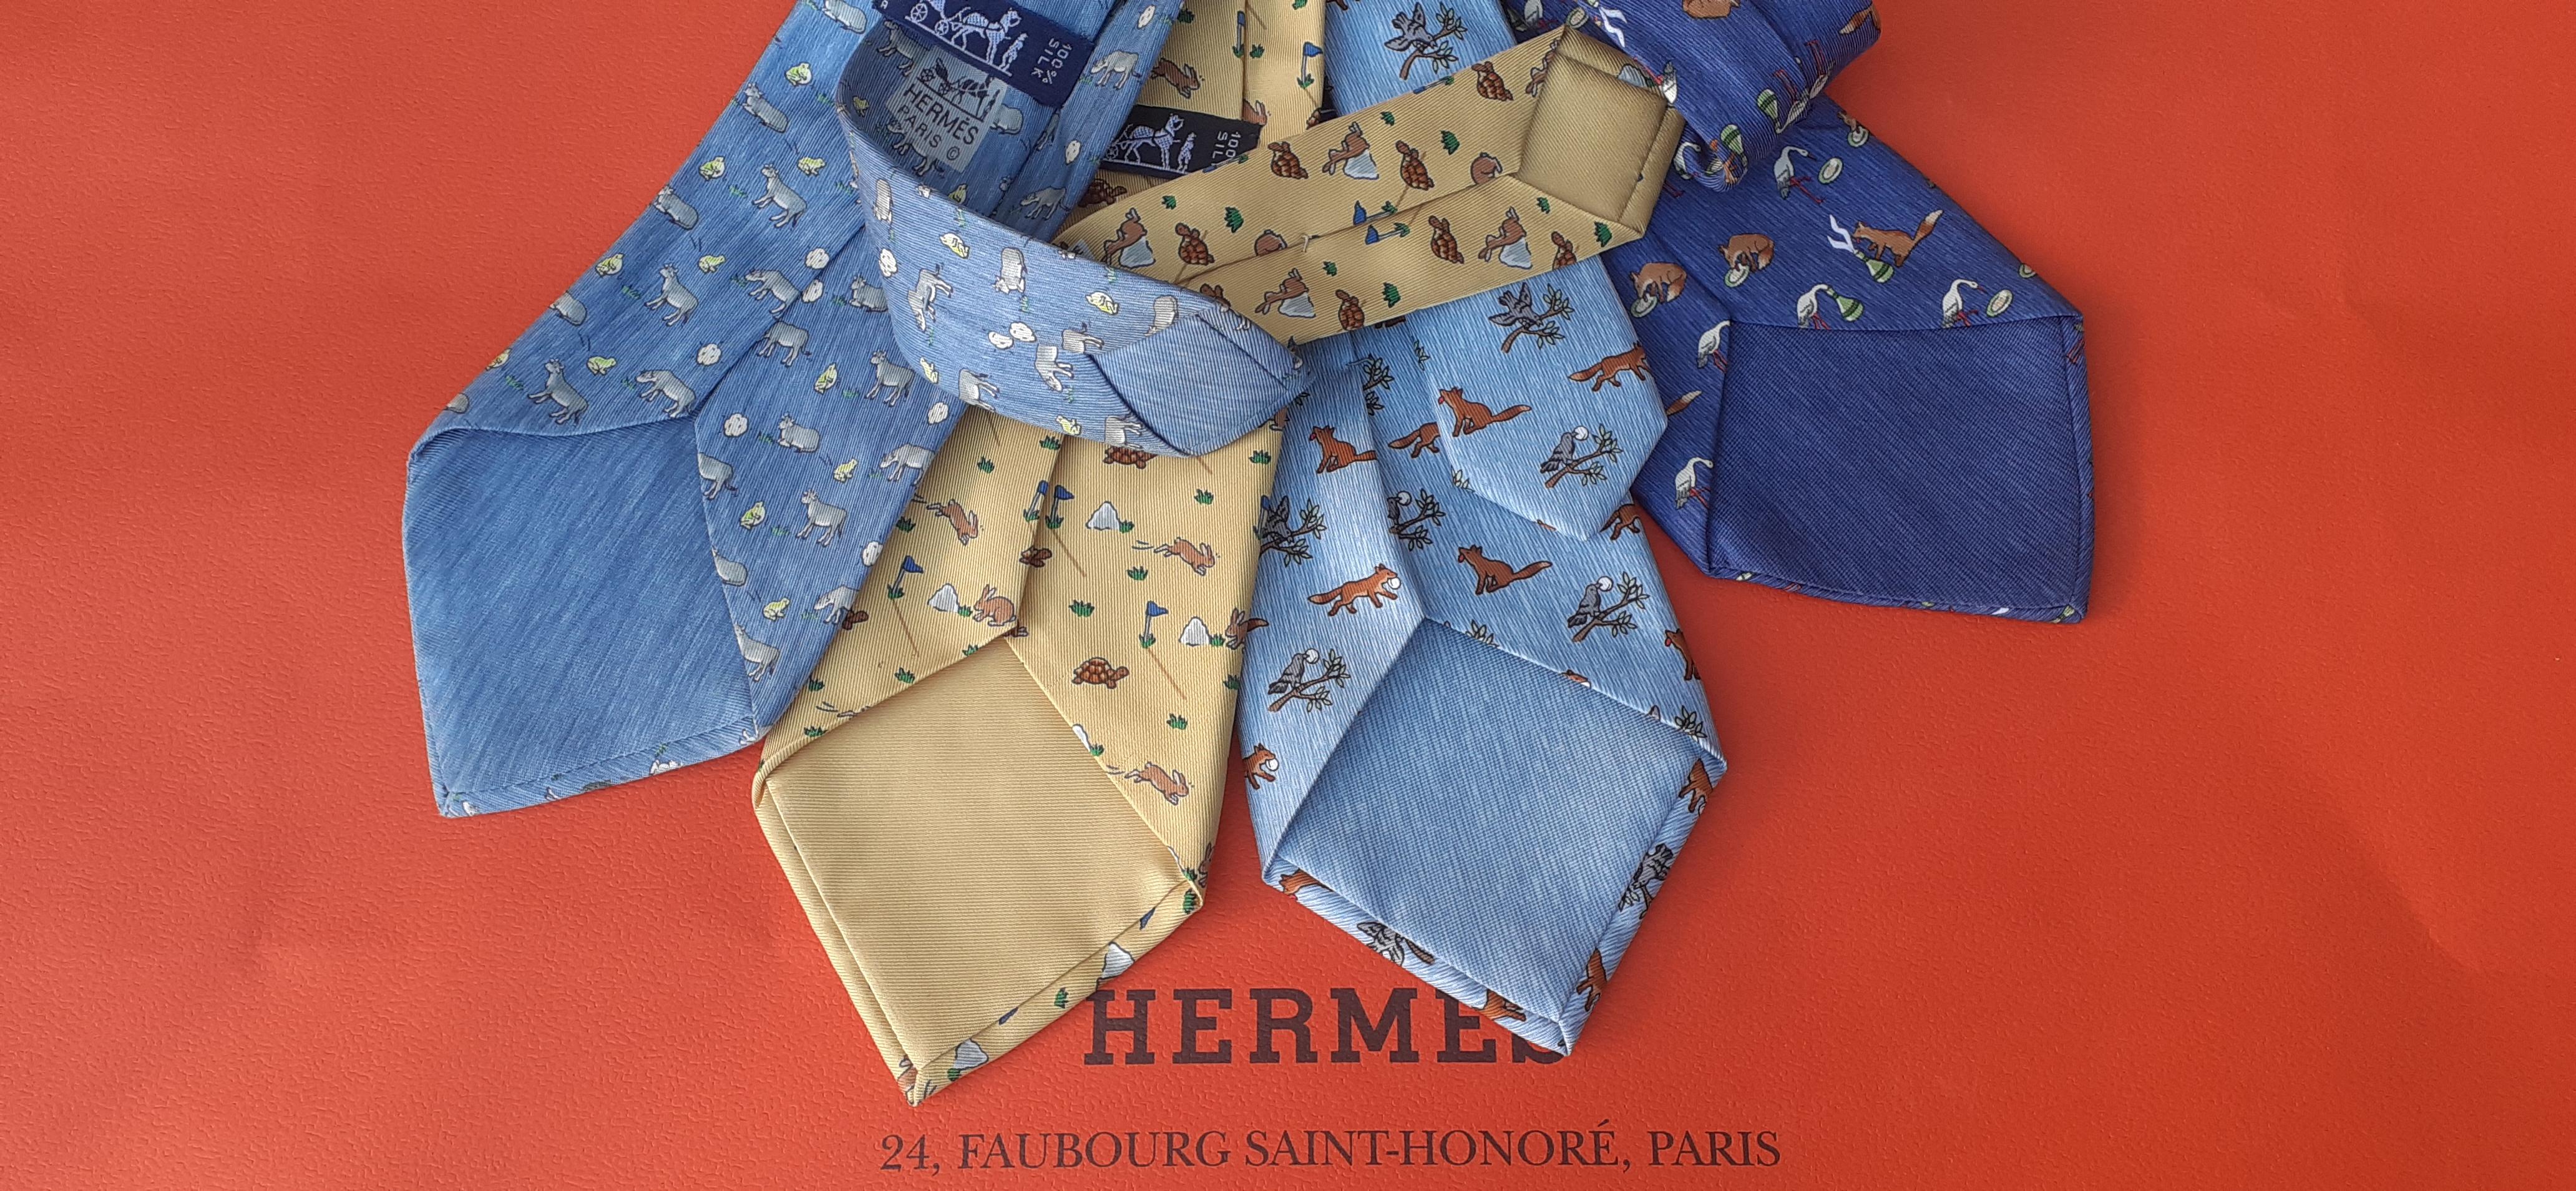 Exceptional Set of 4 Hermès Ties from The Fables of La Fontaine in Silk 7